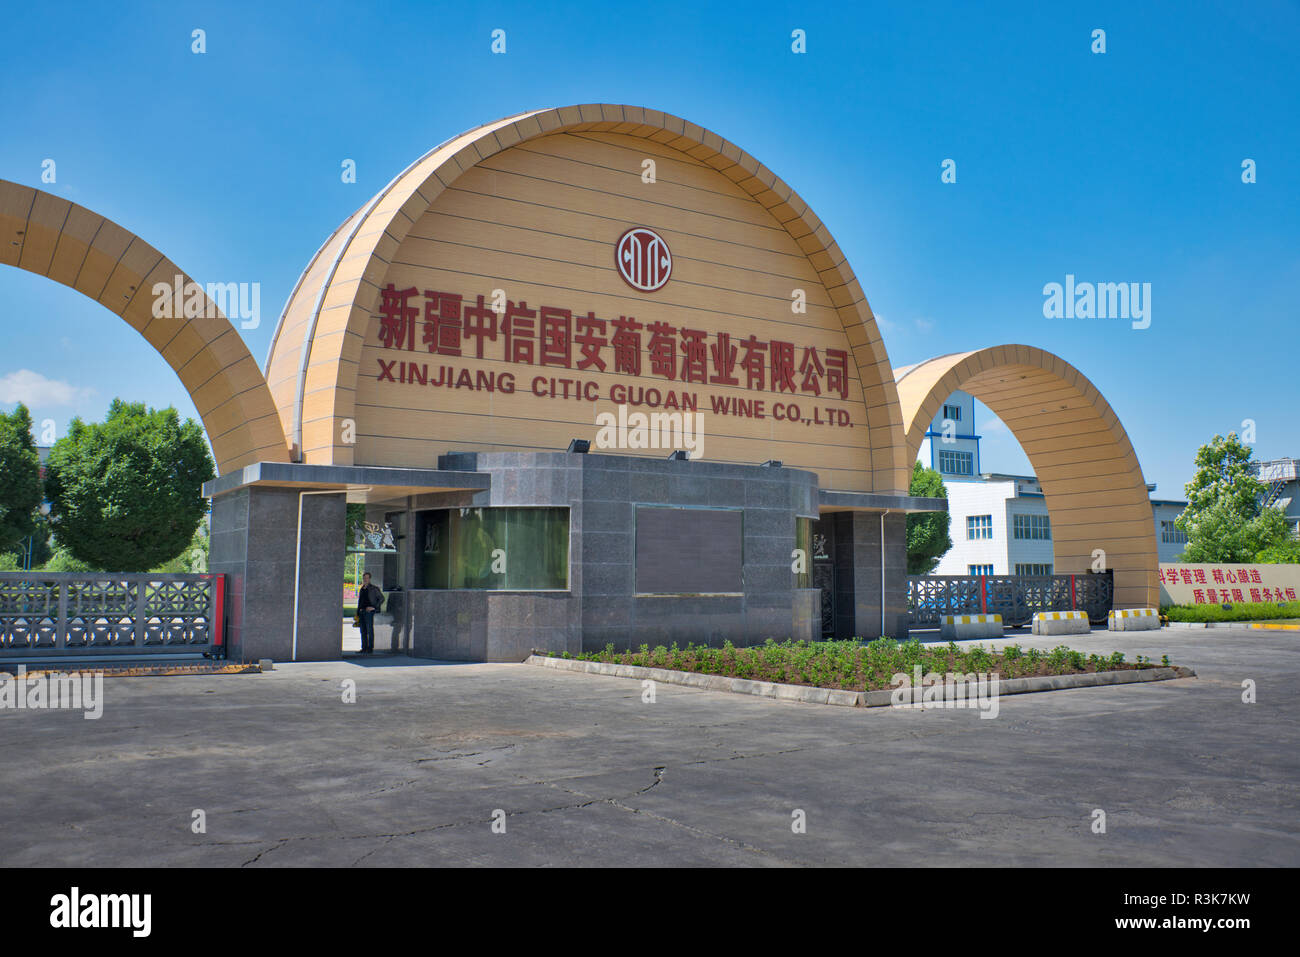 China, Xinjiang province, Xinjiang Uyghur Autonomous Region, Manasi. The anti-terrorist fortified arches of the street entrance to Citic Guoan Winery. Stock Photo